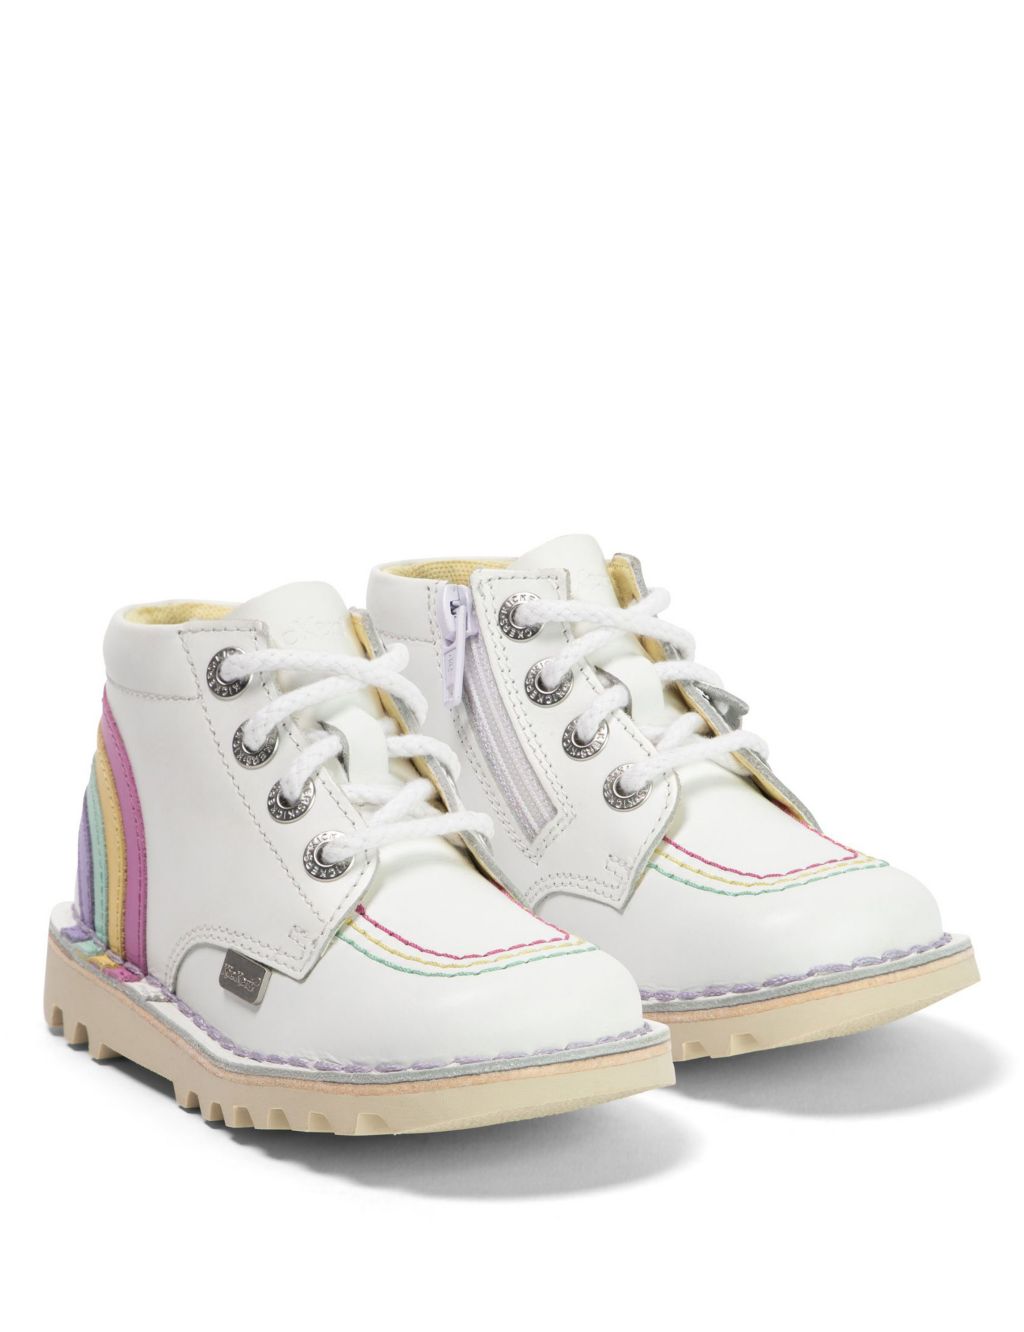 Kids' Leather Rainbow Ankle Boots (7 Small - 12 Small) image 2